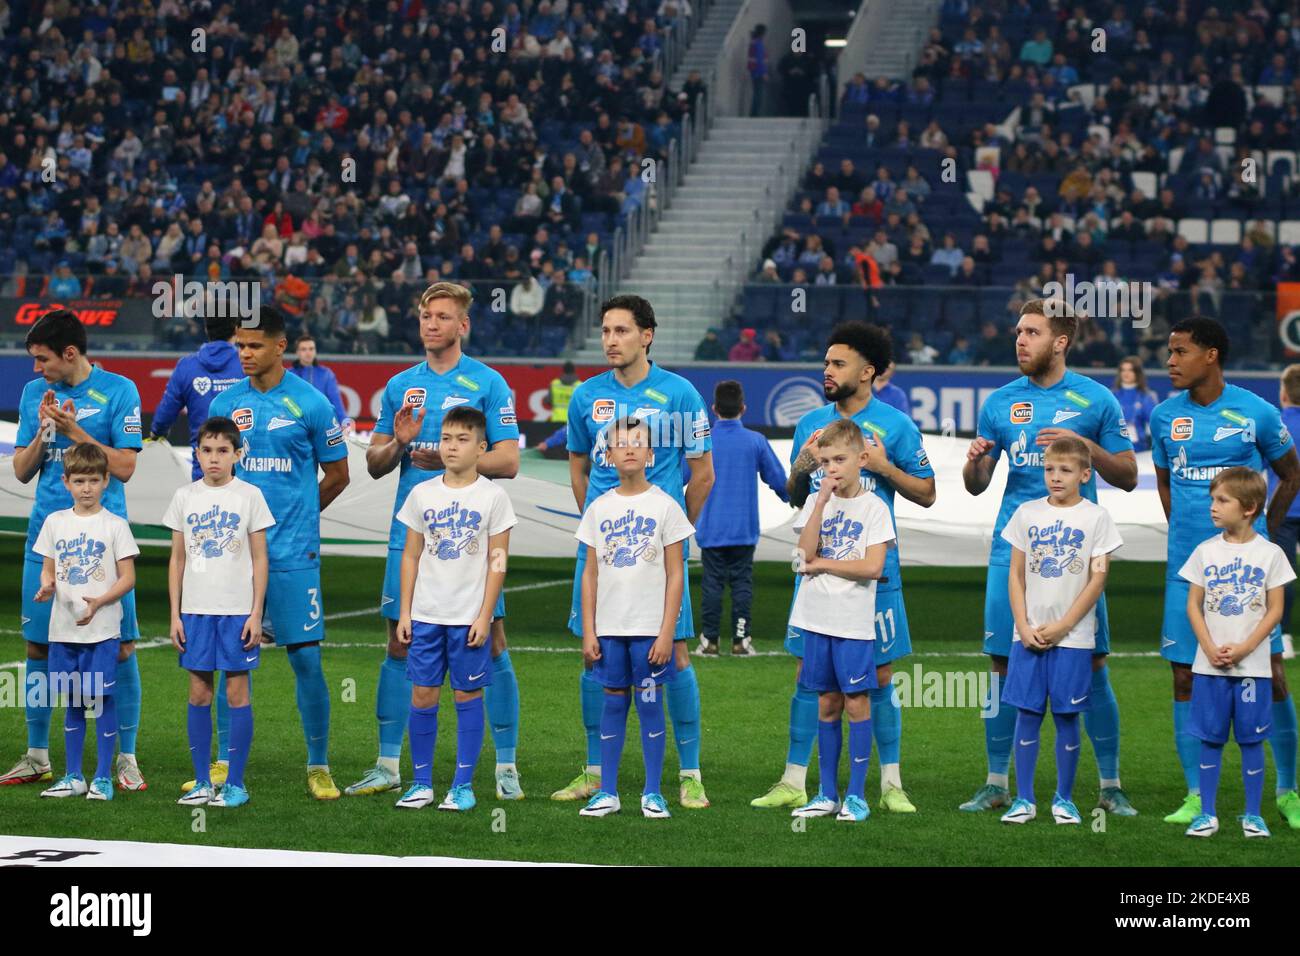 Saint Petersburg, Russia. 05th Nov, 2022. Claudio Luiz Rodrigues Parise Leonel, commonly known as Claudinho (No.11), Daler Kuzyaev (No.14), Dmitri Chistyakov (No.2) of Zenit seen in action during the Russian Premier League football match between Zenit Saint Petersburg and Akhmat Grozny at Gazprom Arena. Final score; Zenit 1:2 Akhmat. (Photo by Maksim Konstantinov/SOPA Images/Sipa USA) Credit: Sipa USA/Alamy Live News Stock Photo